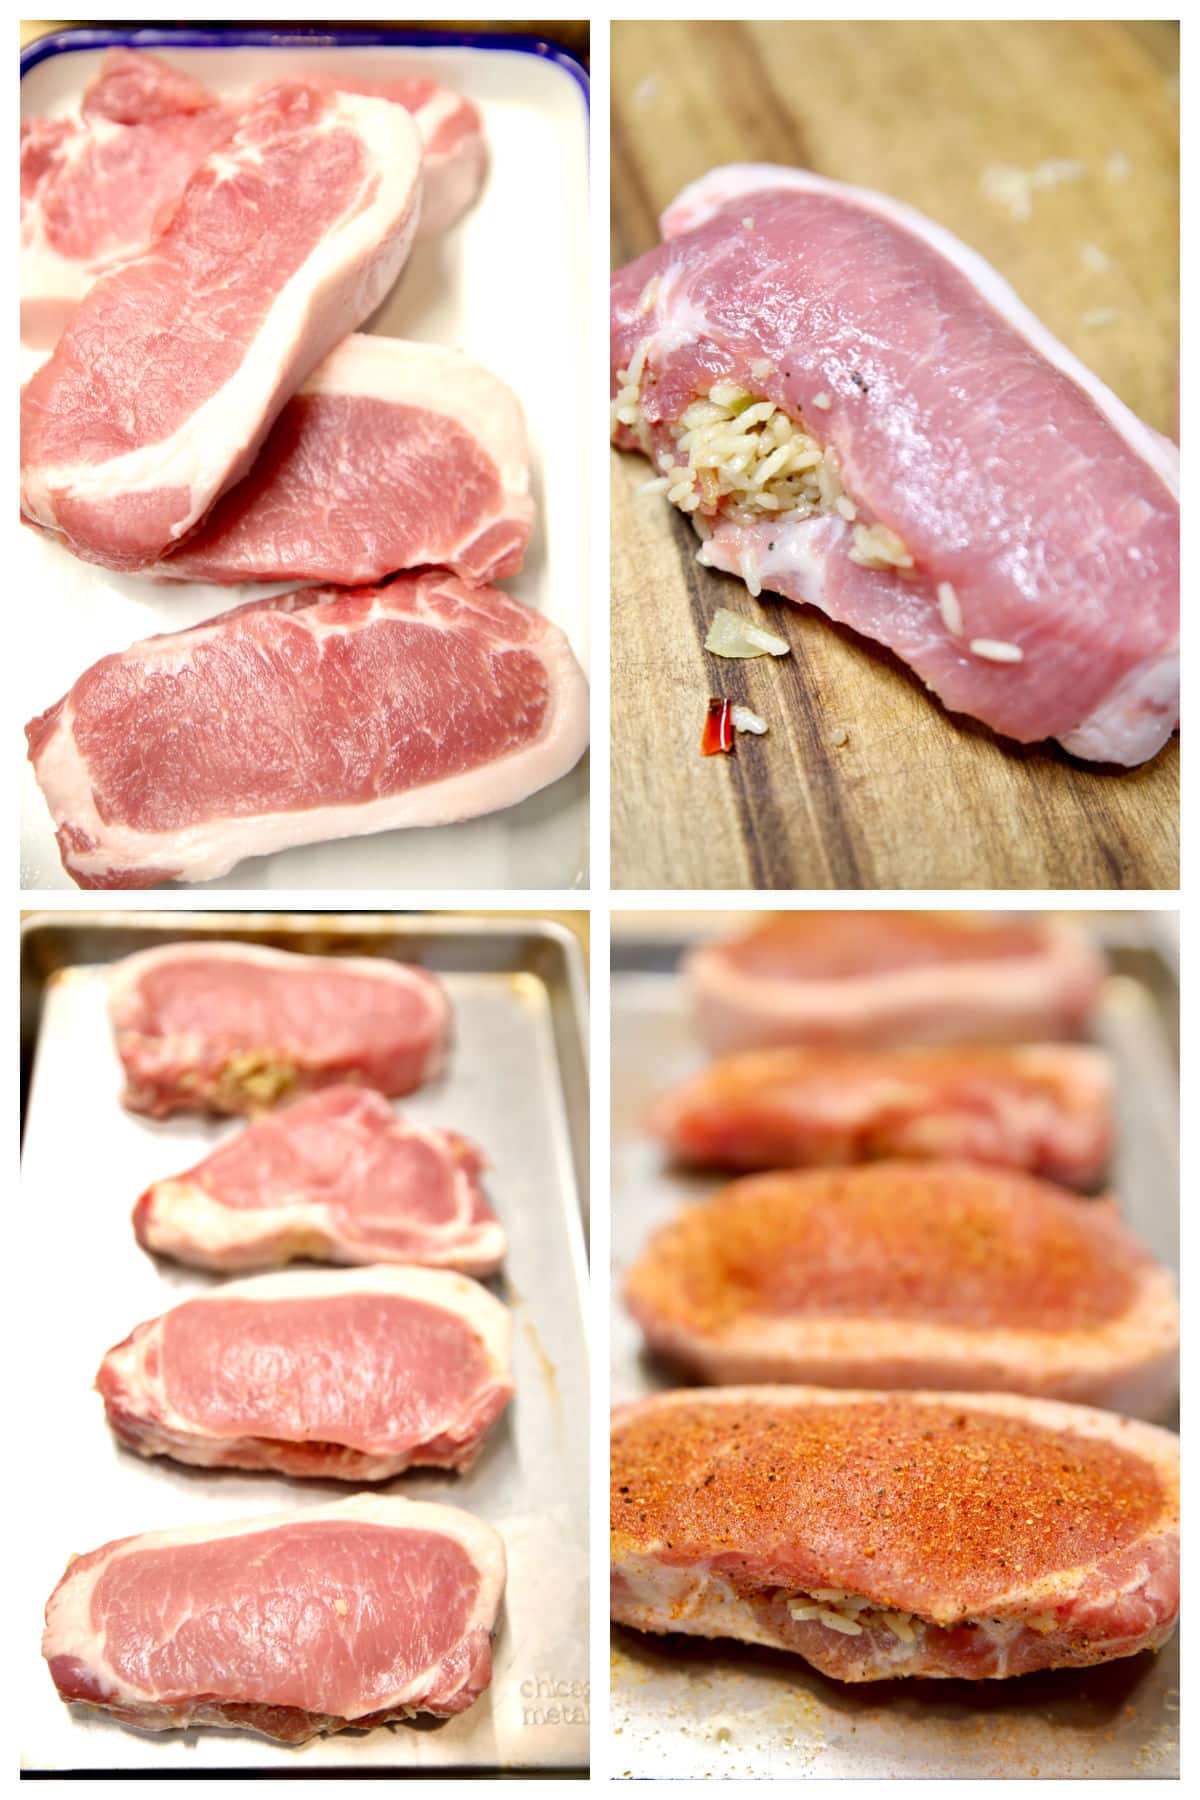 Collage: Stuffing pork chops with rice, seasoning for grilling.